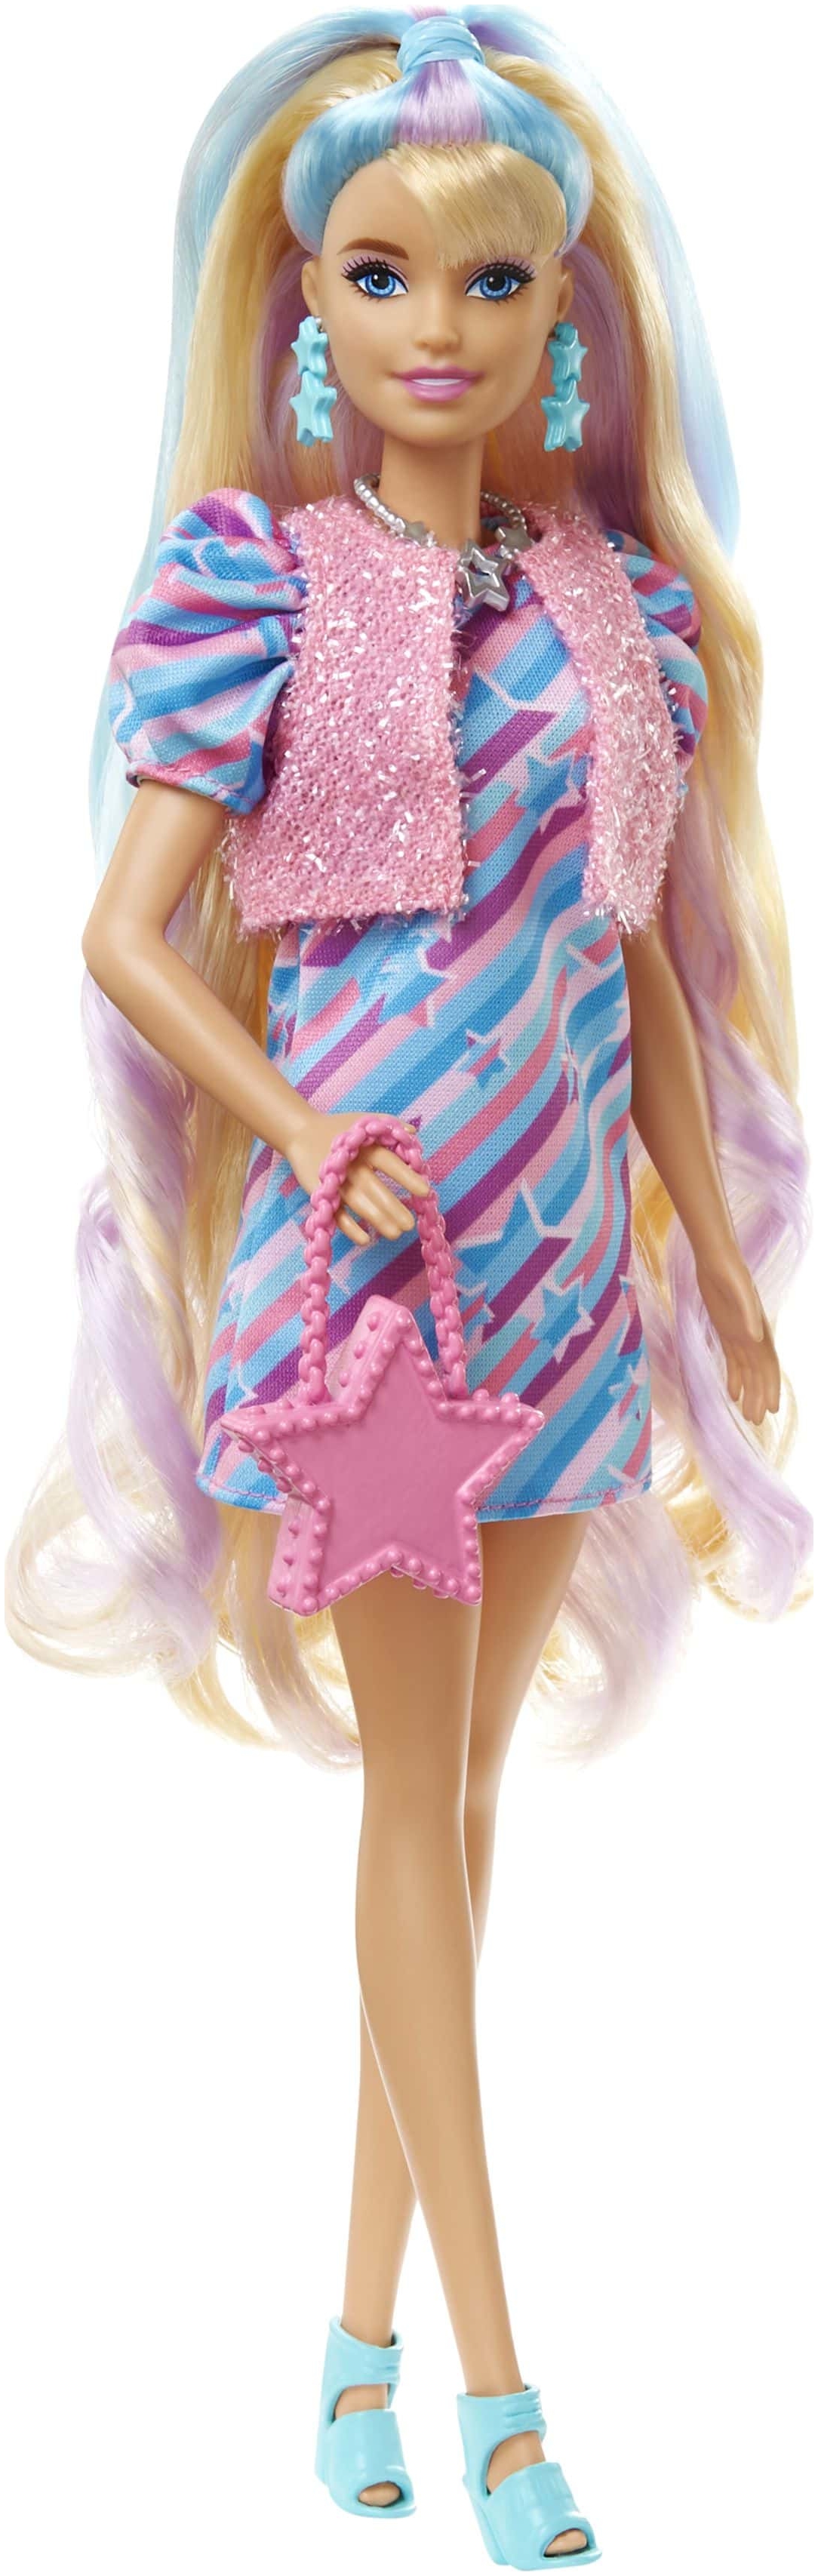 1647851443 Youloveit Com Barbie Totally Hair 1 Hcm88 3 